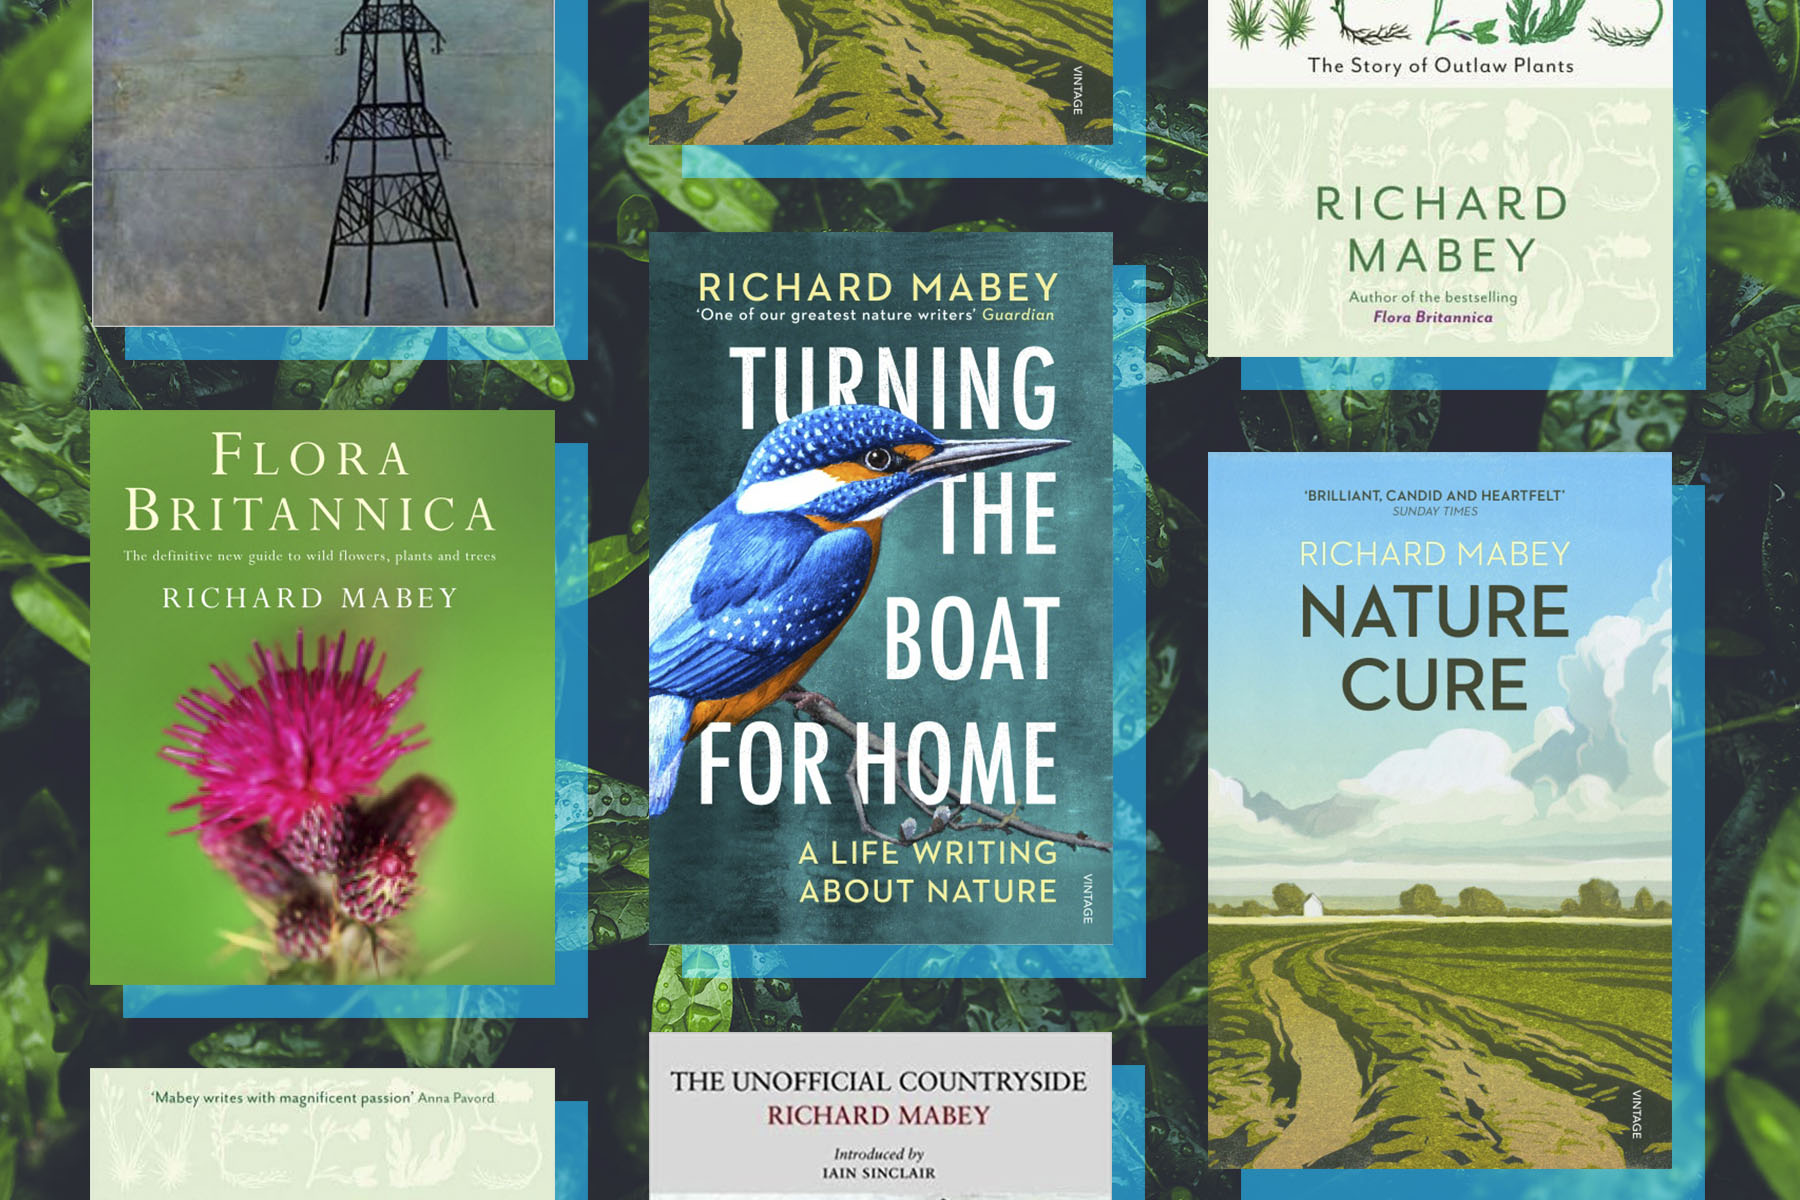 Covers of Richard Mabey's books against a botanical background.